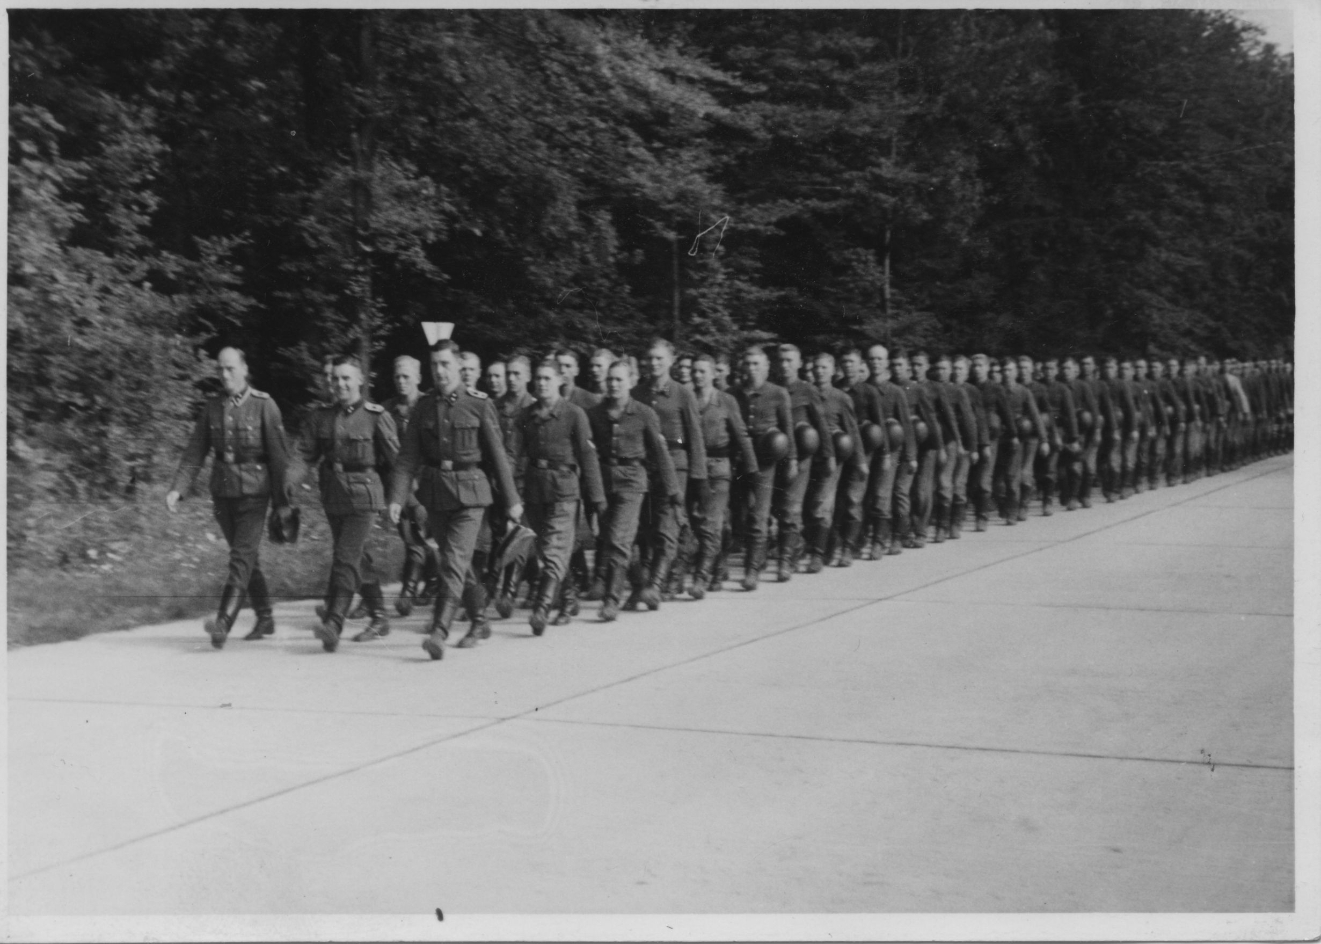 SS-members of a recruit unit of the SS-Totenkopfstandarte 14 marching back after their swearing in on the Blutstraße. In rows of three, a long line of uniformed men walks along the concrete slab road through the forest. 